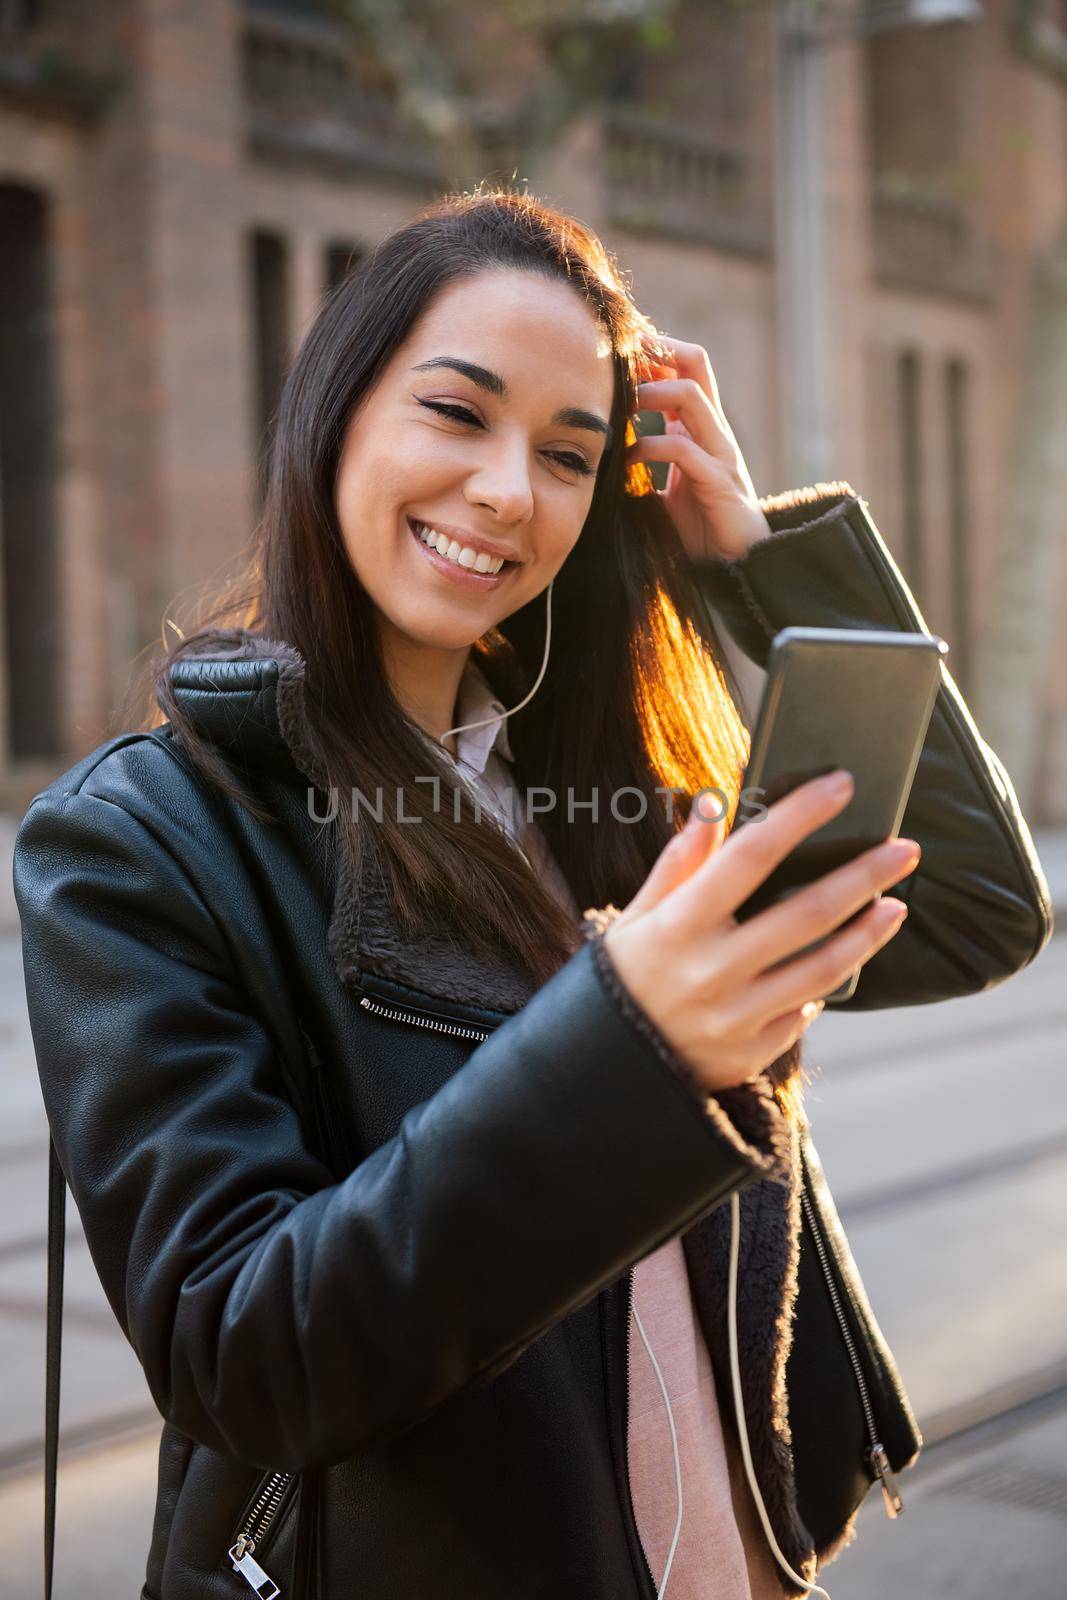 smiling young woman reading a message at her phone by raulmelldo